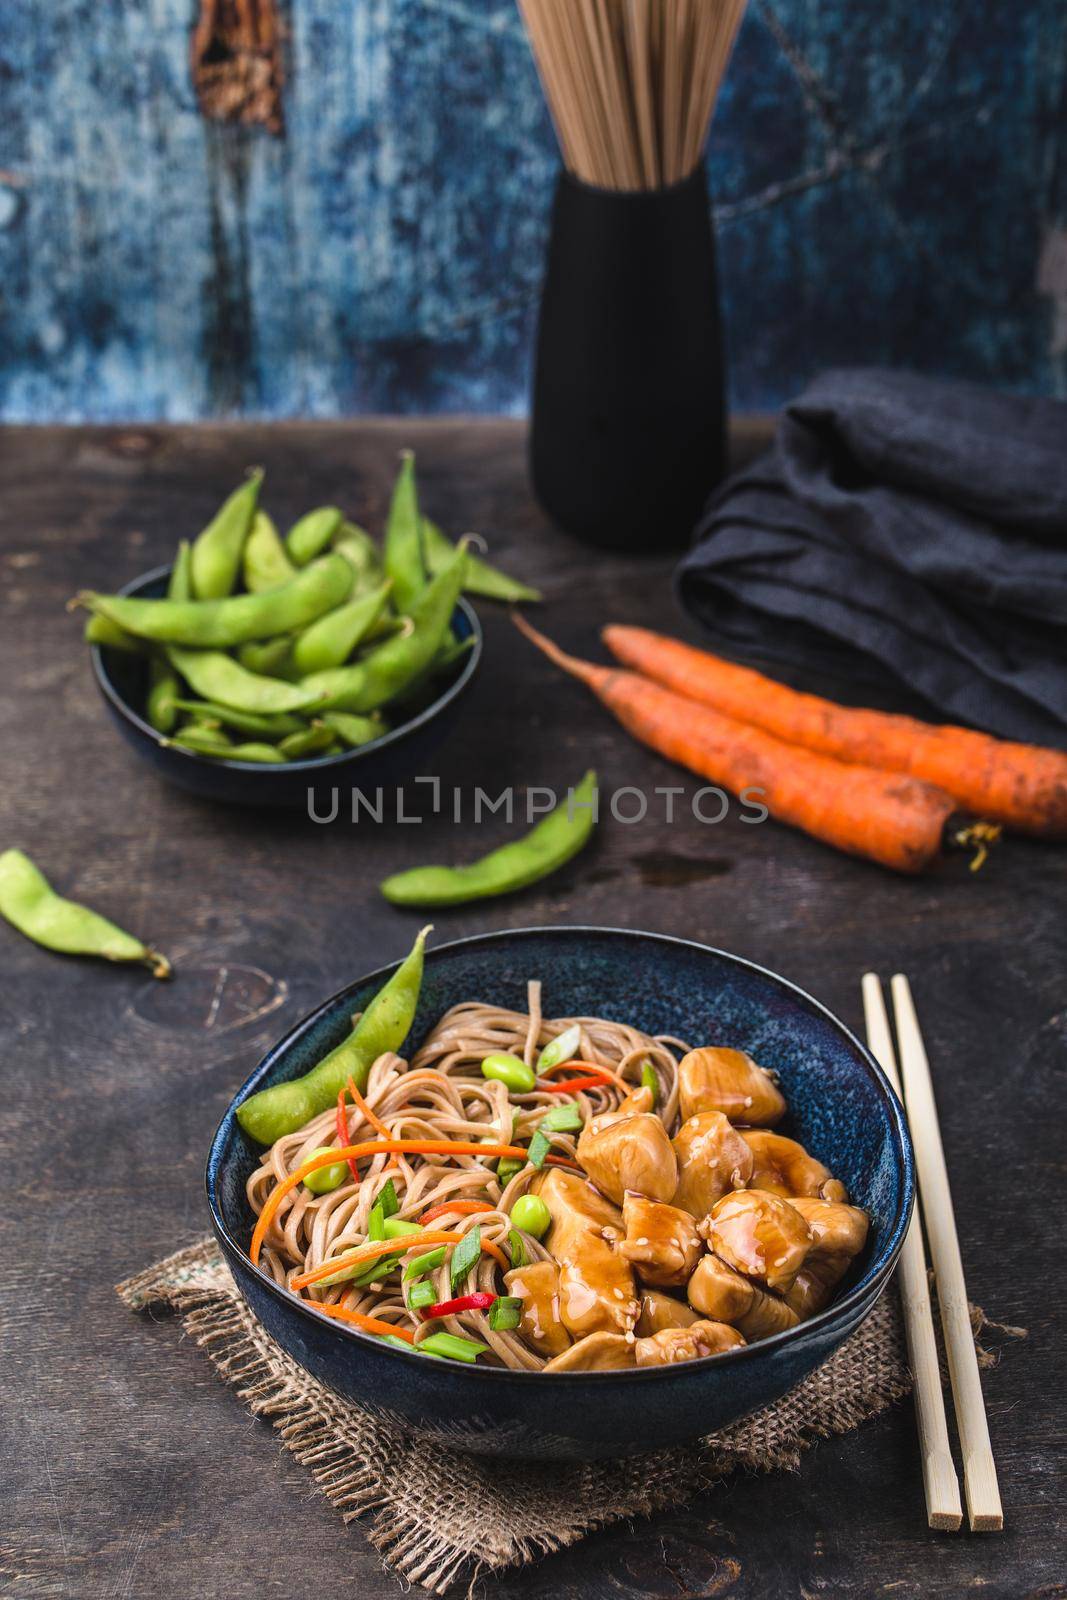 Asian noodles with chicken, vegetables in bowl, rustic wooden background. Soba noodles, teriyaki sauce chicken, edamame beans, sesame, chopsticks. Closeup. Asian style dinner. Chinese/Japanese noodles